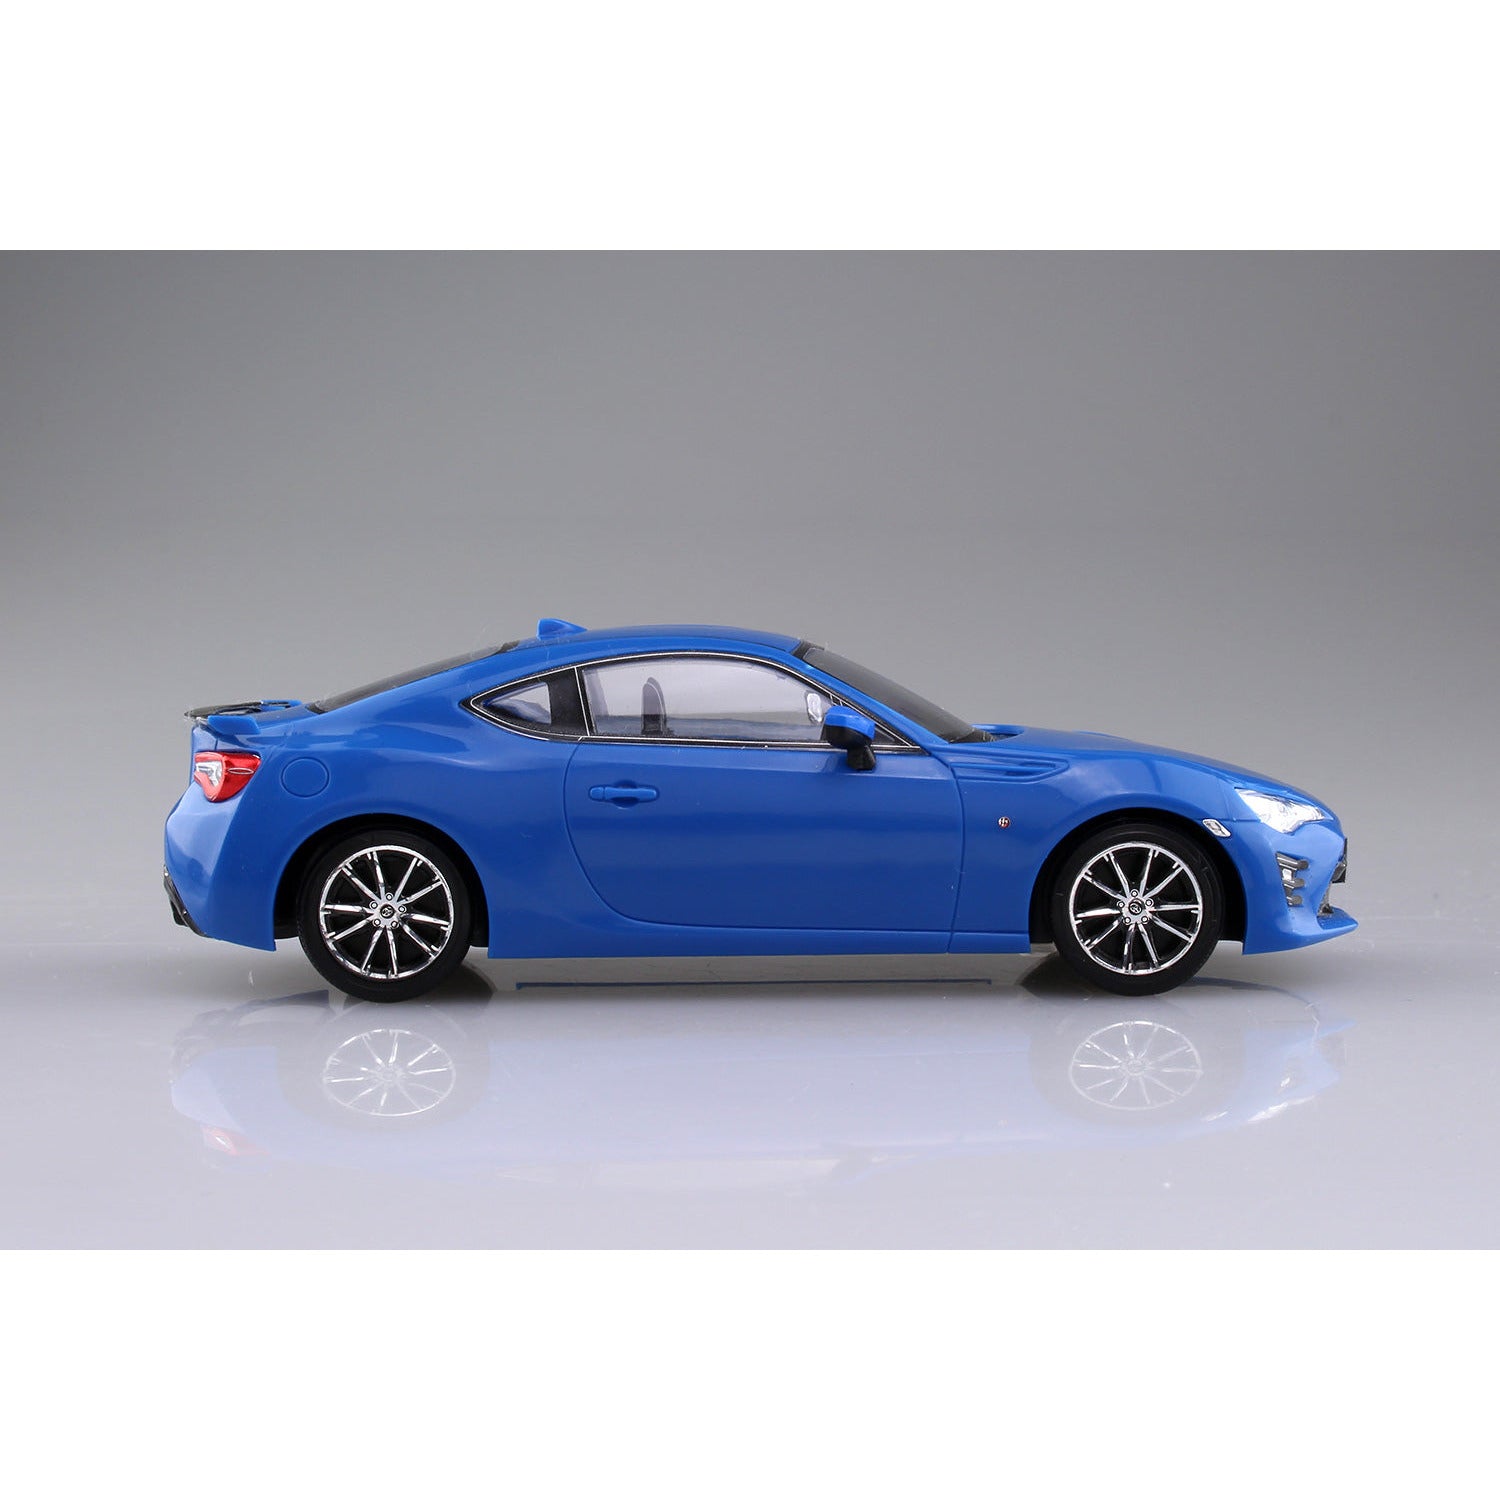 The Snap Kit Toyota 86 (BRIGHT Blue) 1/32 #05754 by Aoshima